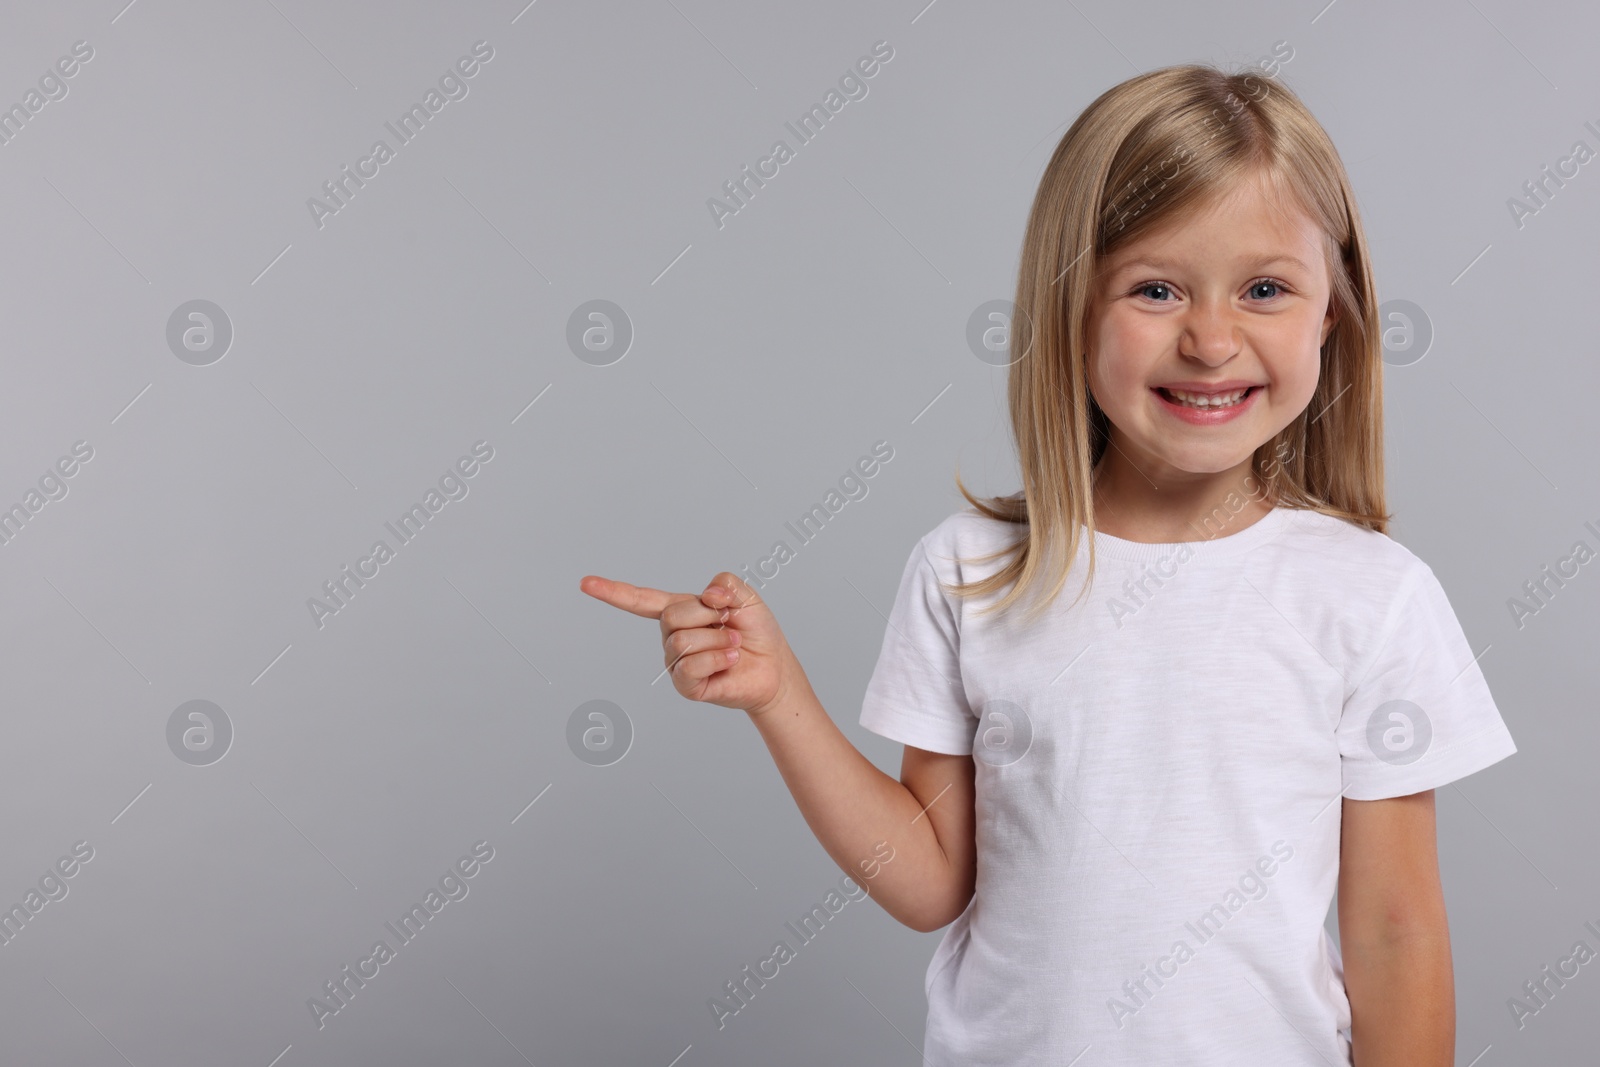 Photo of Special promotion. Smiling girl pointing at something on grey background. Space for text